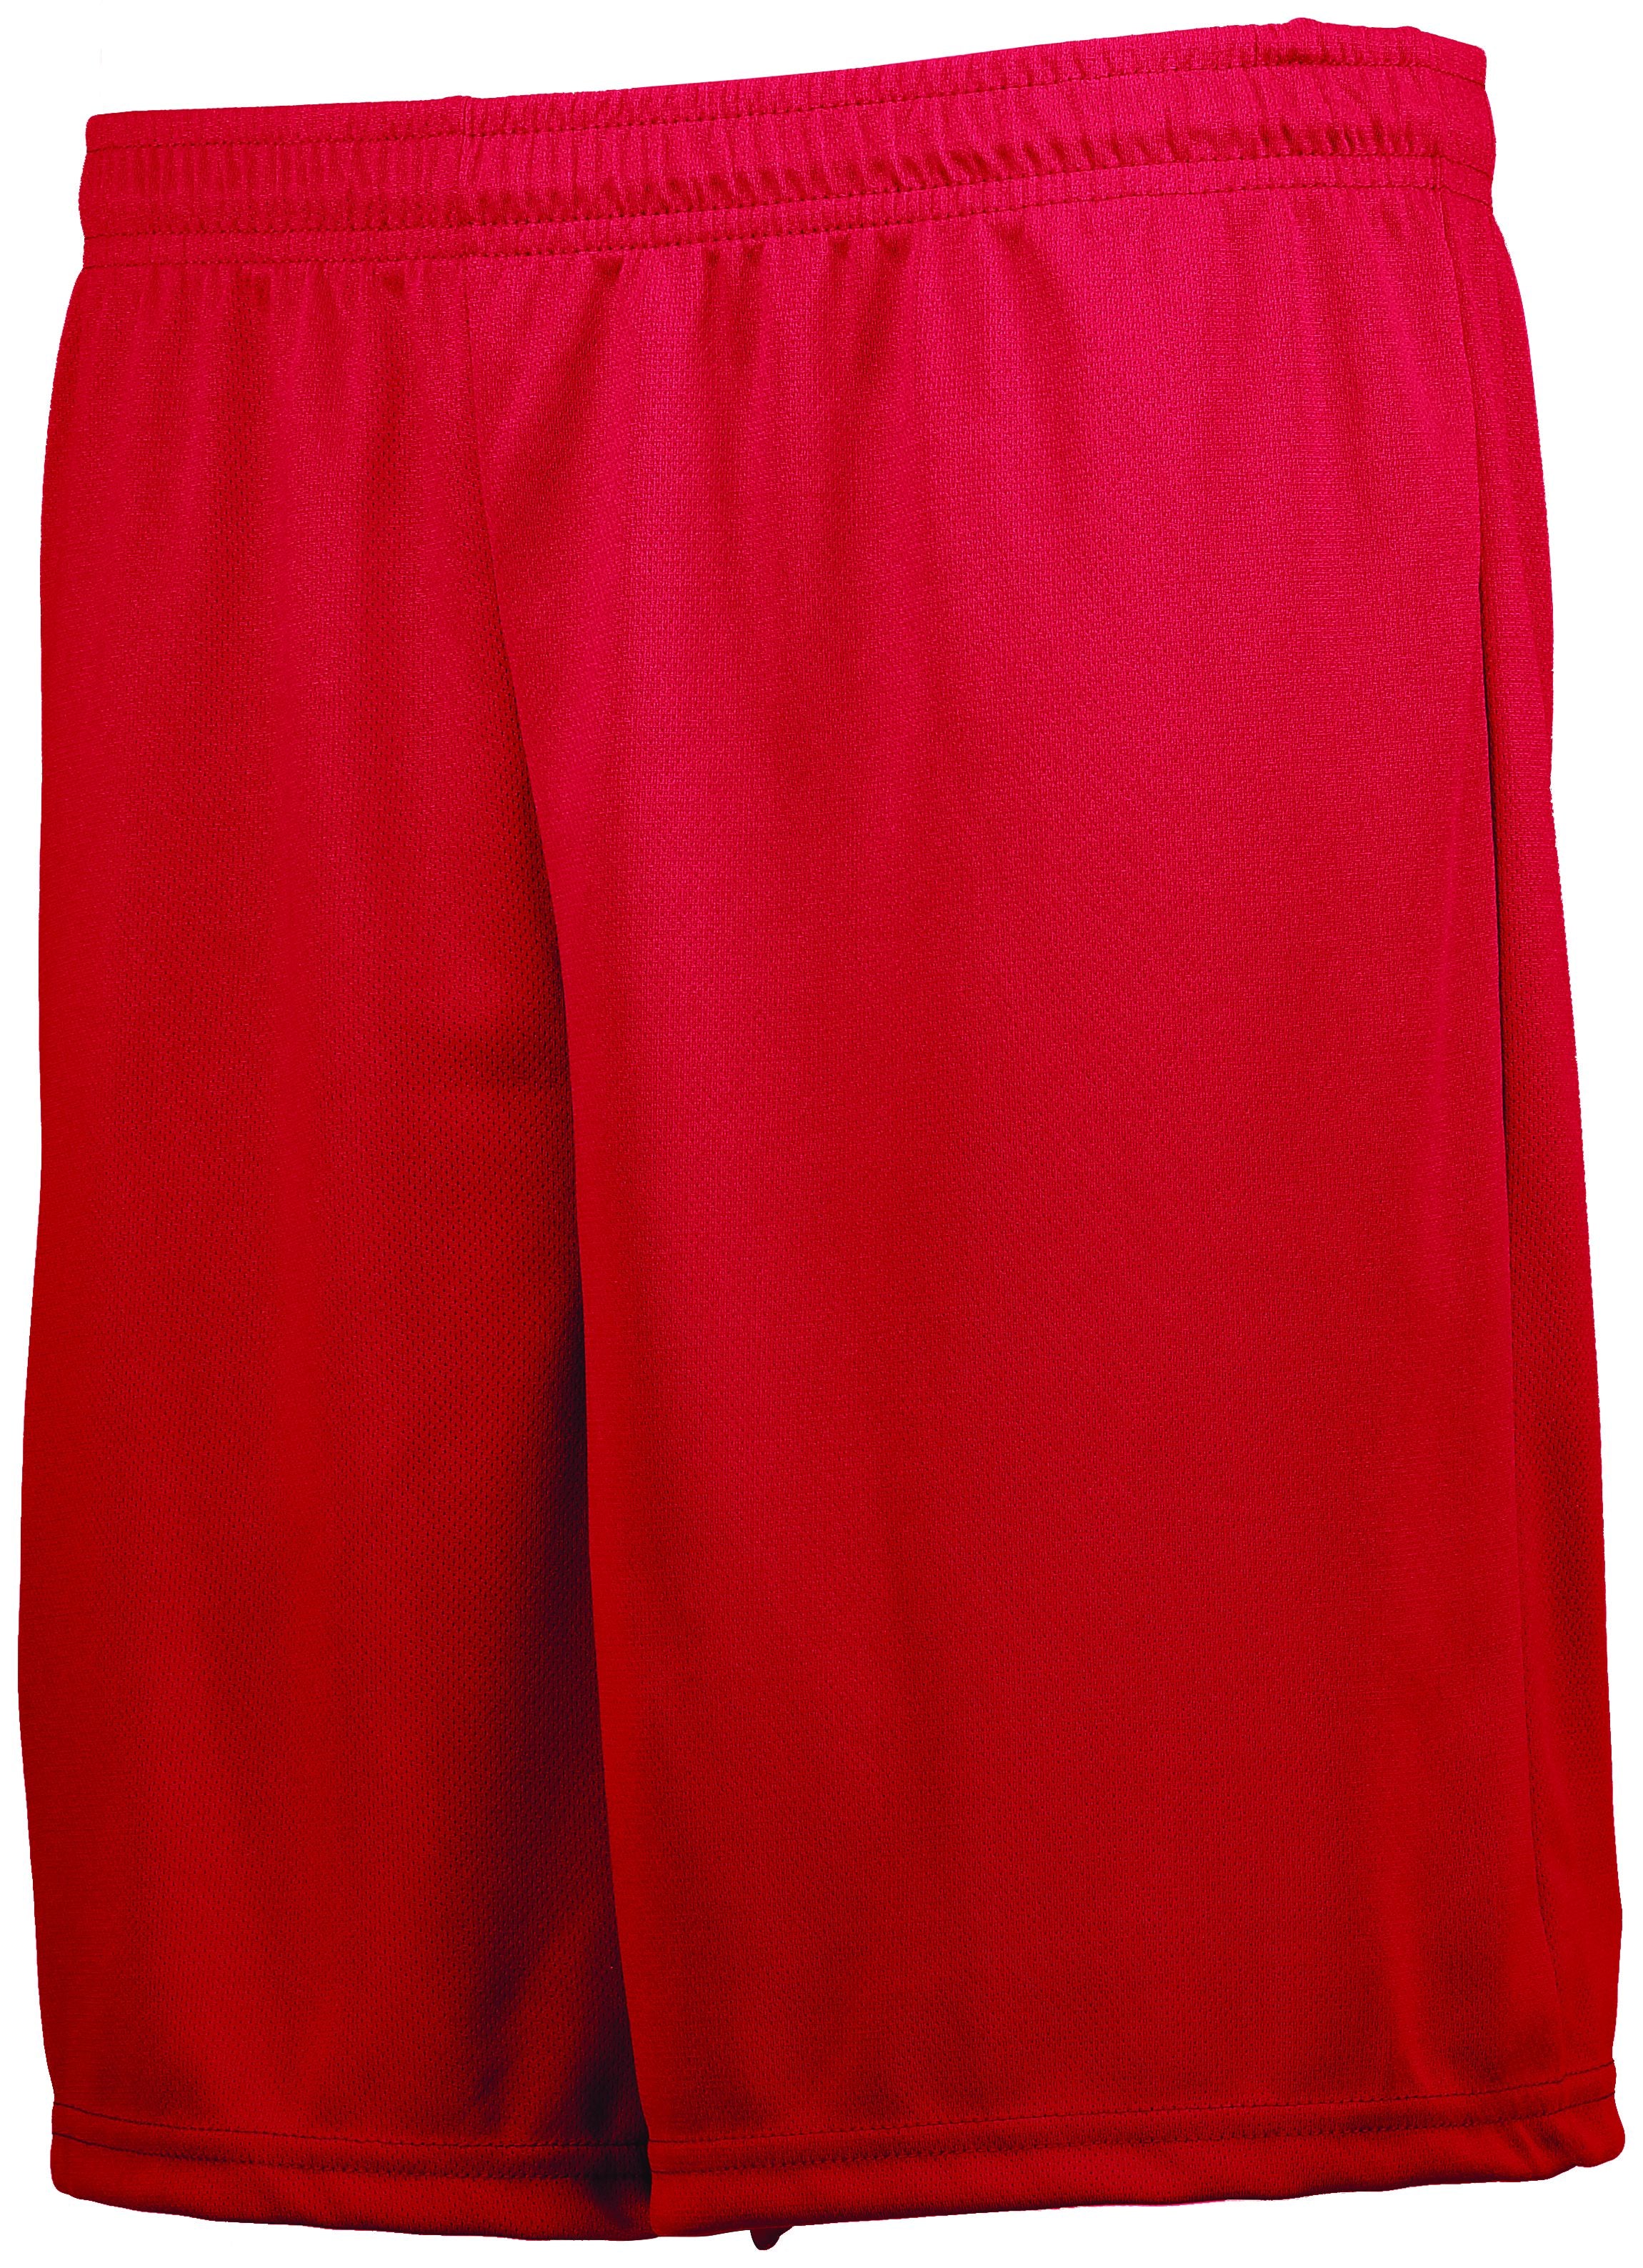 High 5 Prevail Shorts in Scarlet  -Part of the Adult, Adult-Shorts, High5-Products, Soccer, All-Sports-1 product lines at KanaleyCreations.com